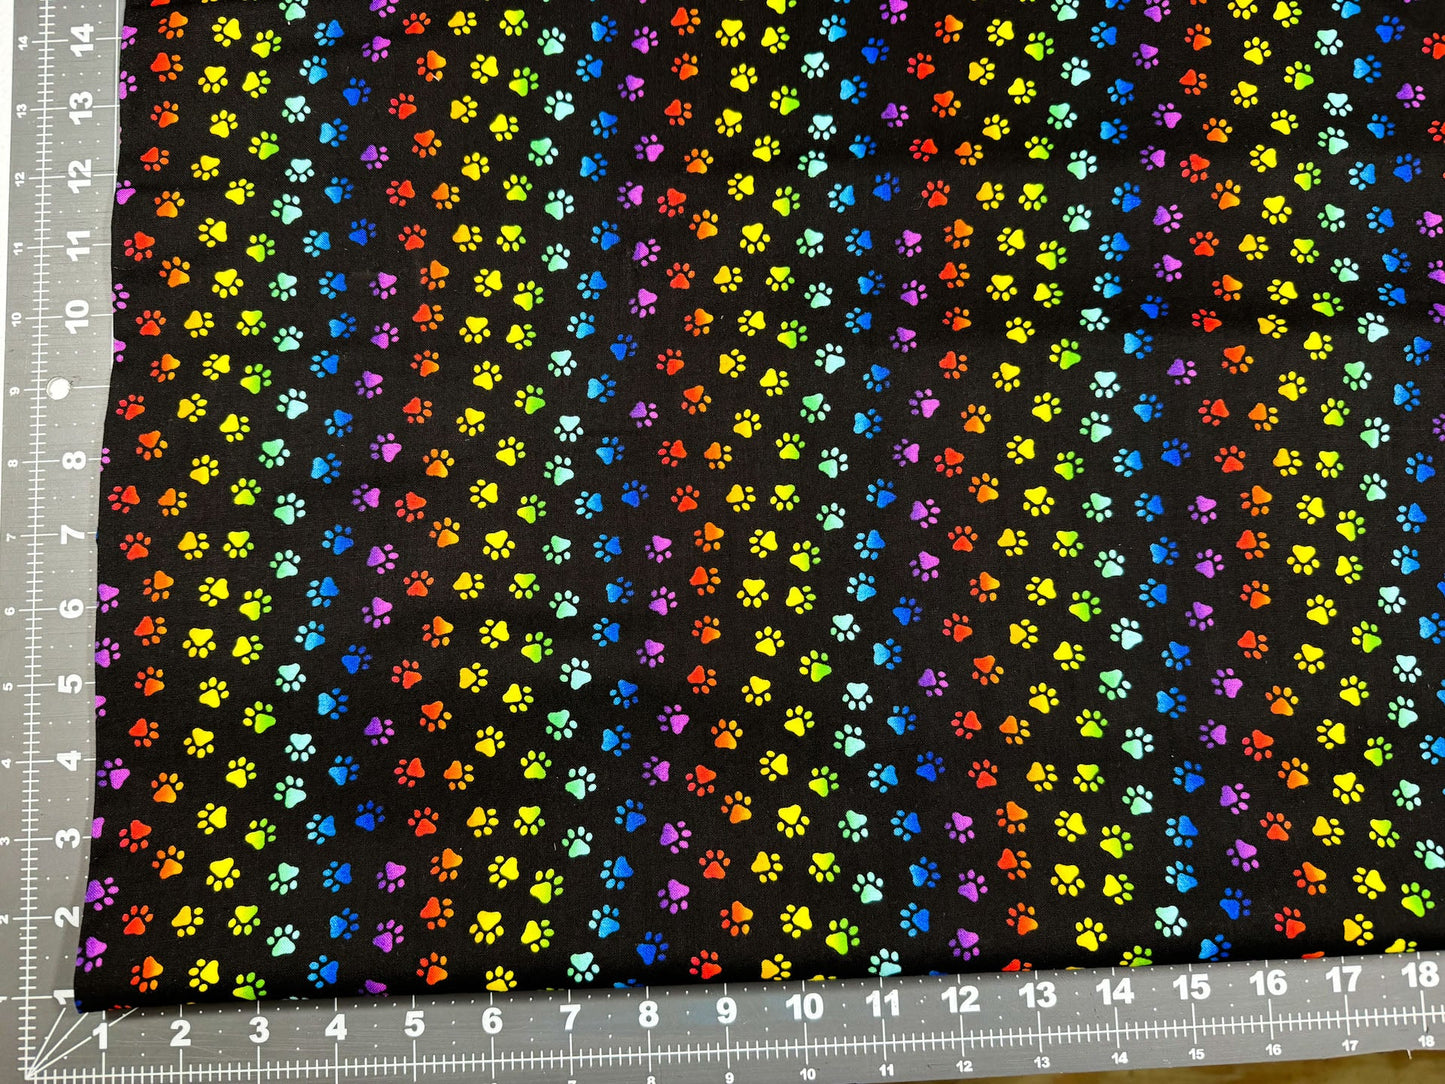 Neon Cat Paw fabric Allover animal paws